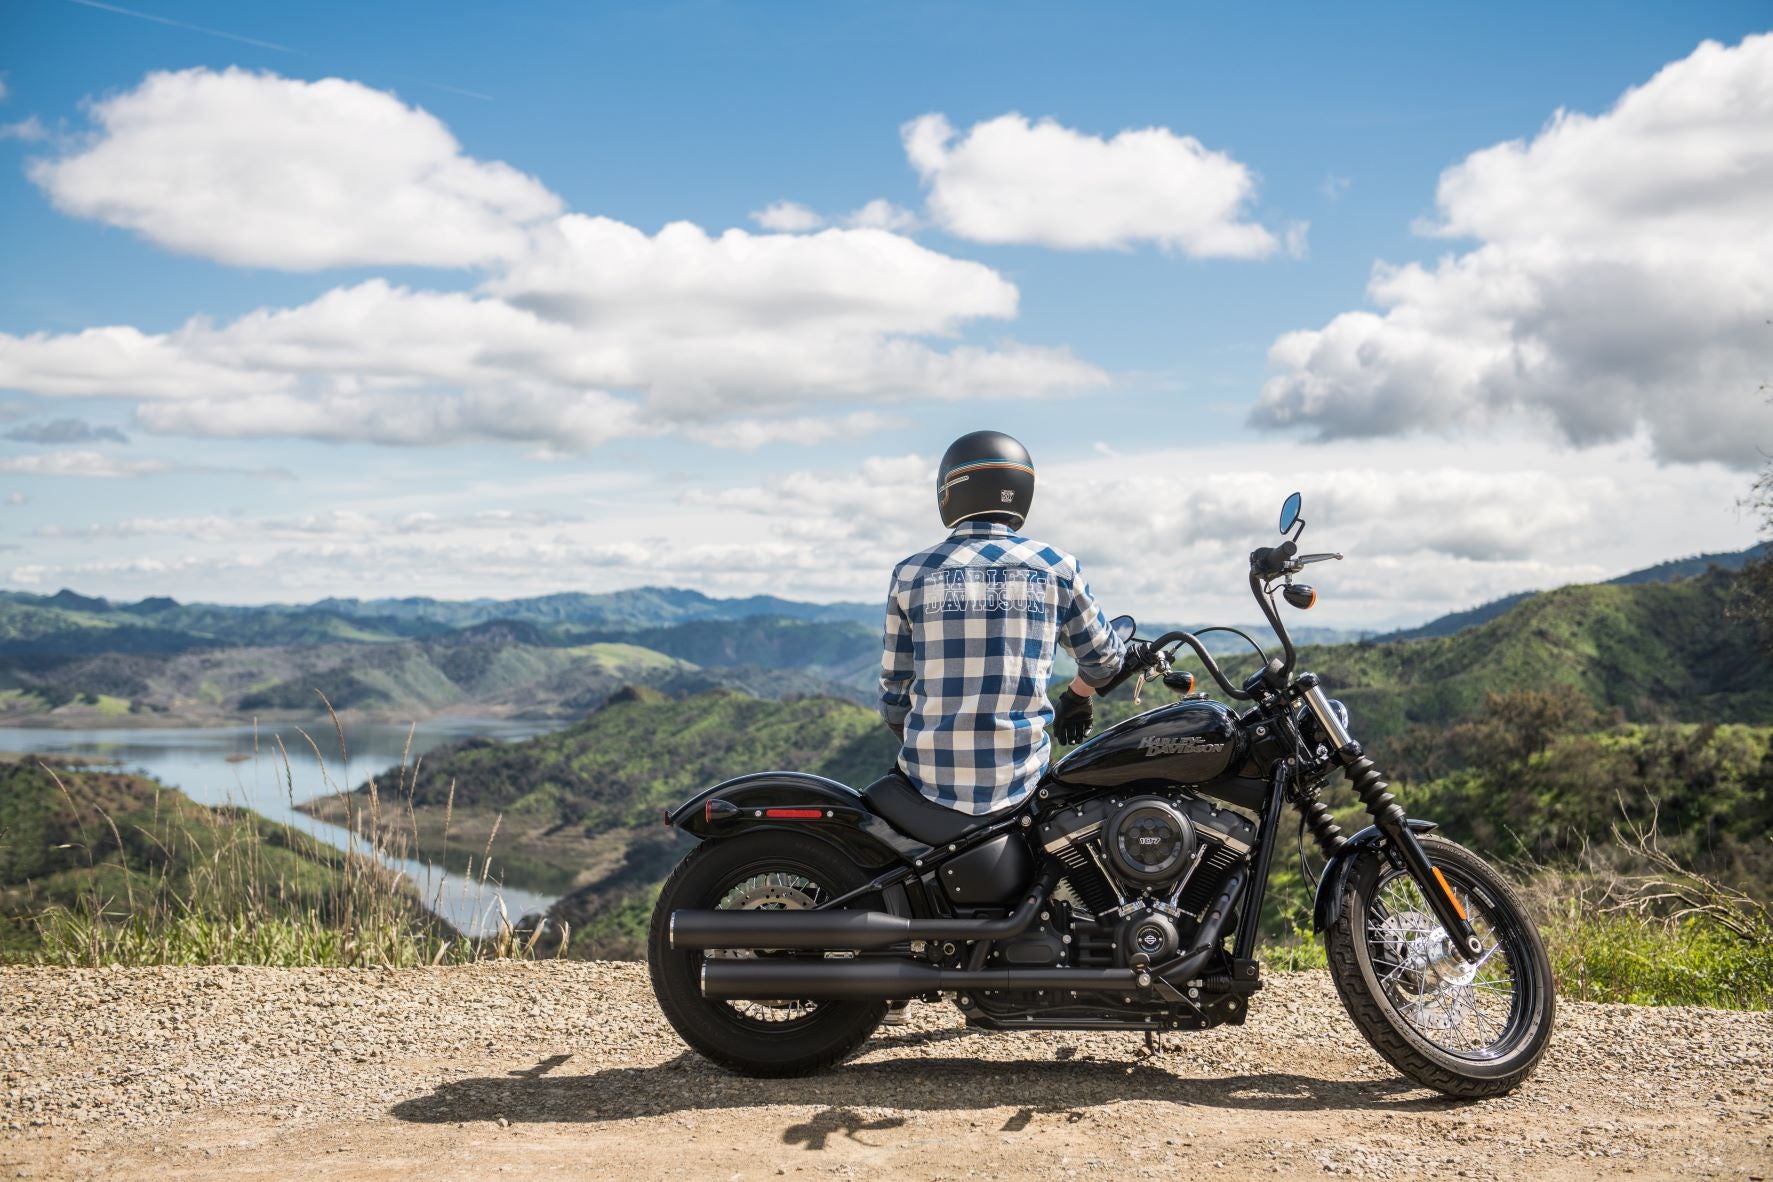 Is Harley Motorcycle Good For a Long-distance Rides?